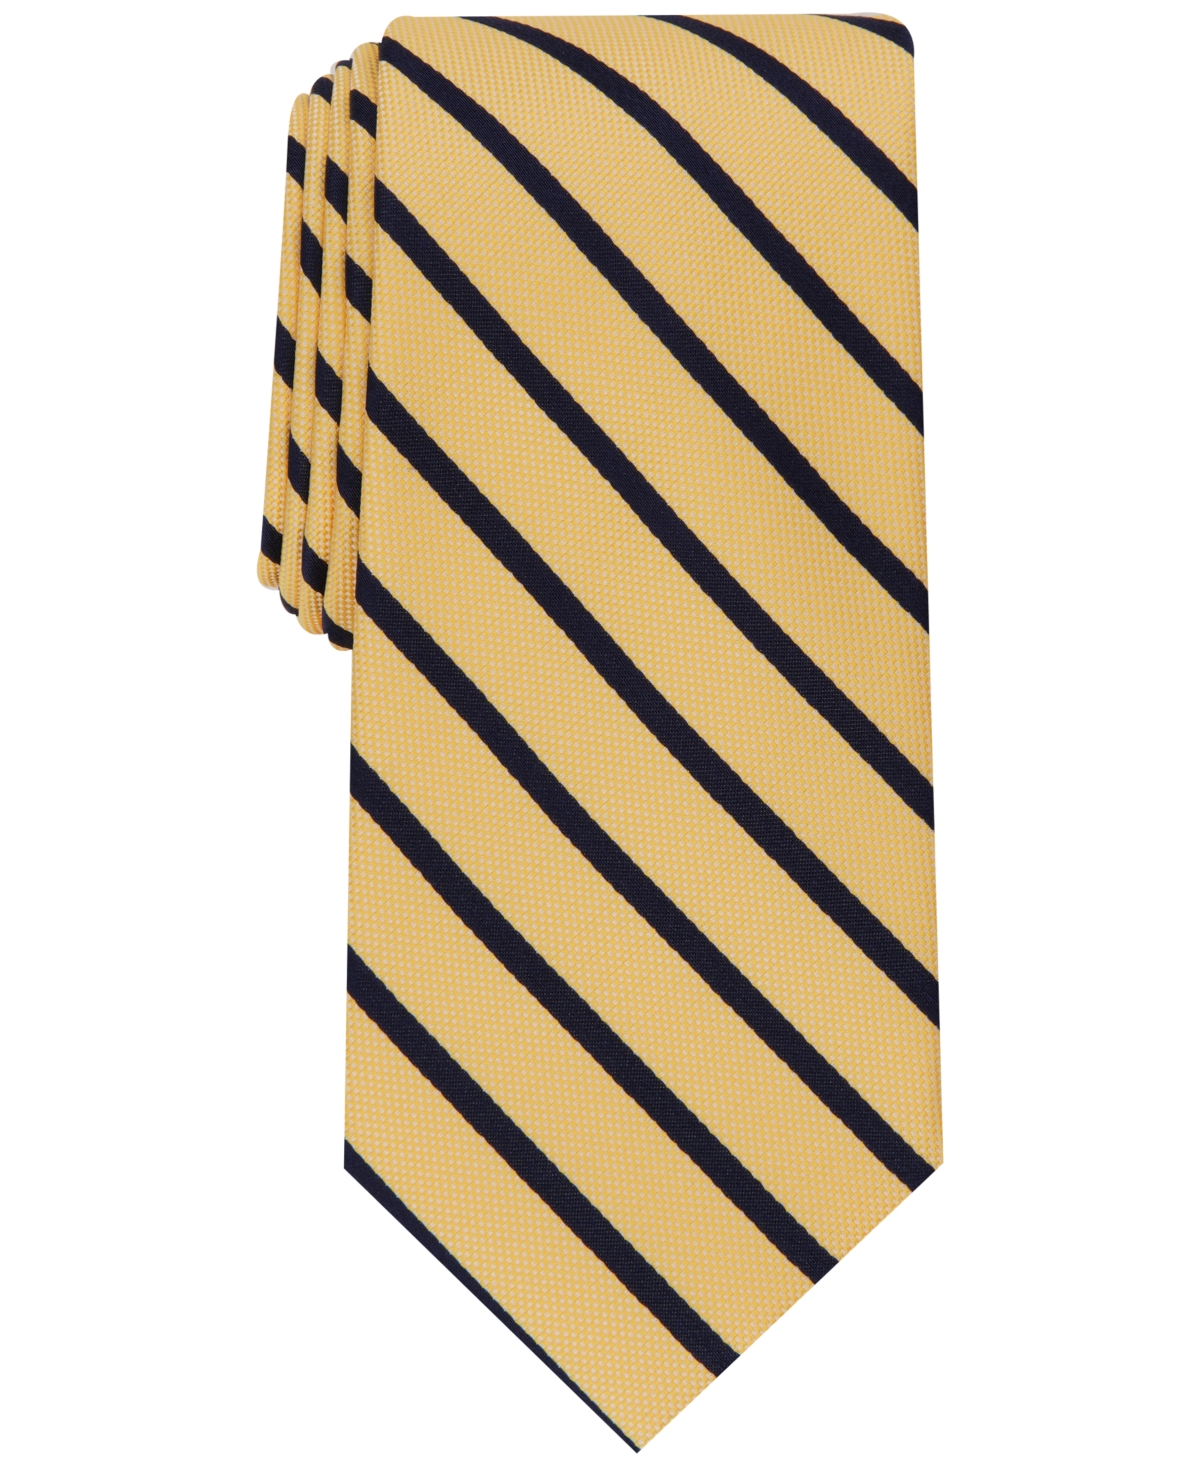 Men's Classic Stripe Tie, Created for Macy's - Gold